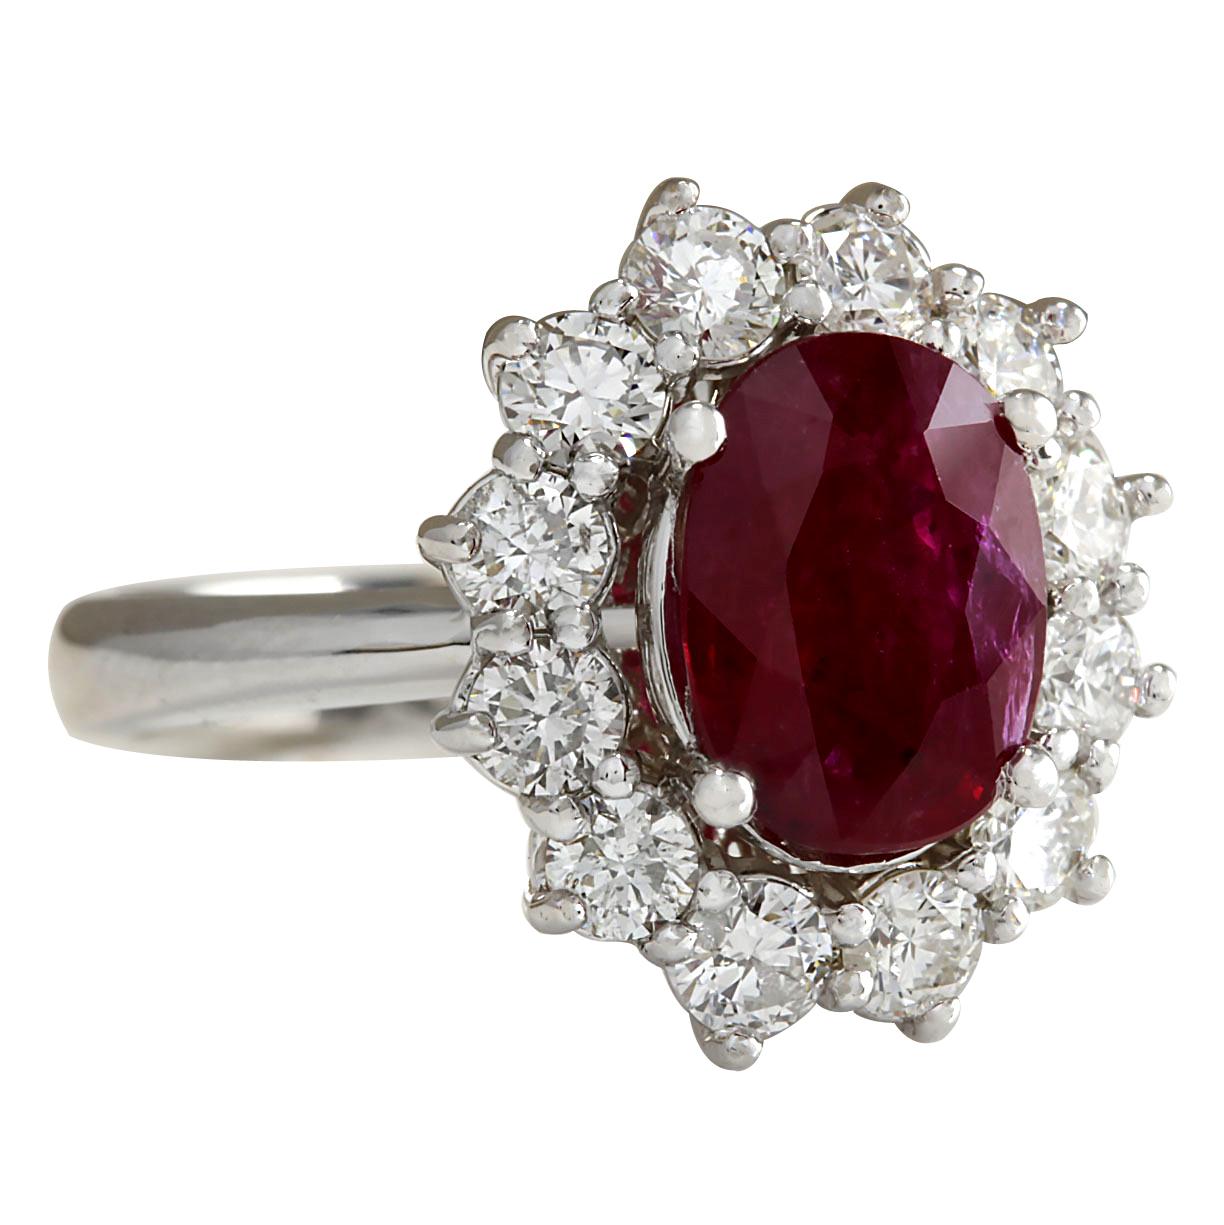 Stamped: 14K White Gold
Total Ring Weight: 5.0 Grams
Total Natural Ruby Weight is 2.28 Carat (Measures: 9.00x7.00 mm)
Color: Red
Total Natural Diamond Weight is 1.10 Carat
Color: F-G, Clarity: VS2-SI1
Face Measures: 16.30x14.50 mm
Sku: [702852W]